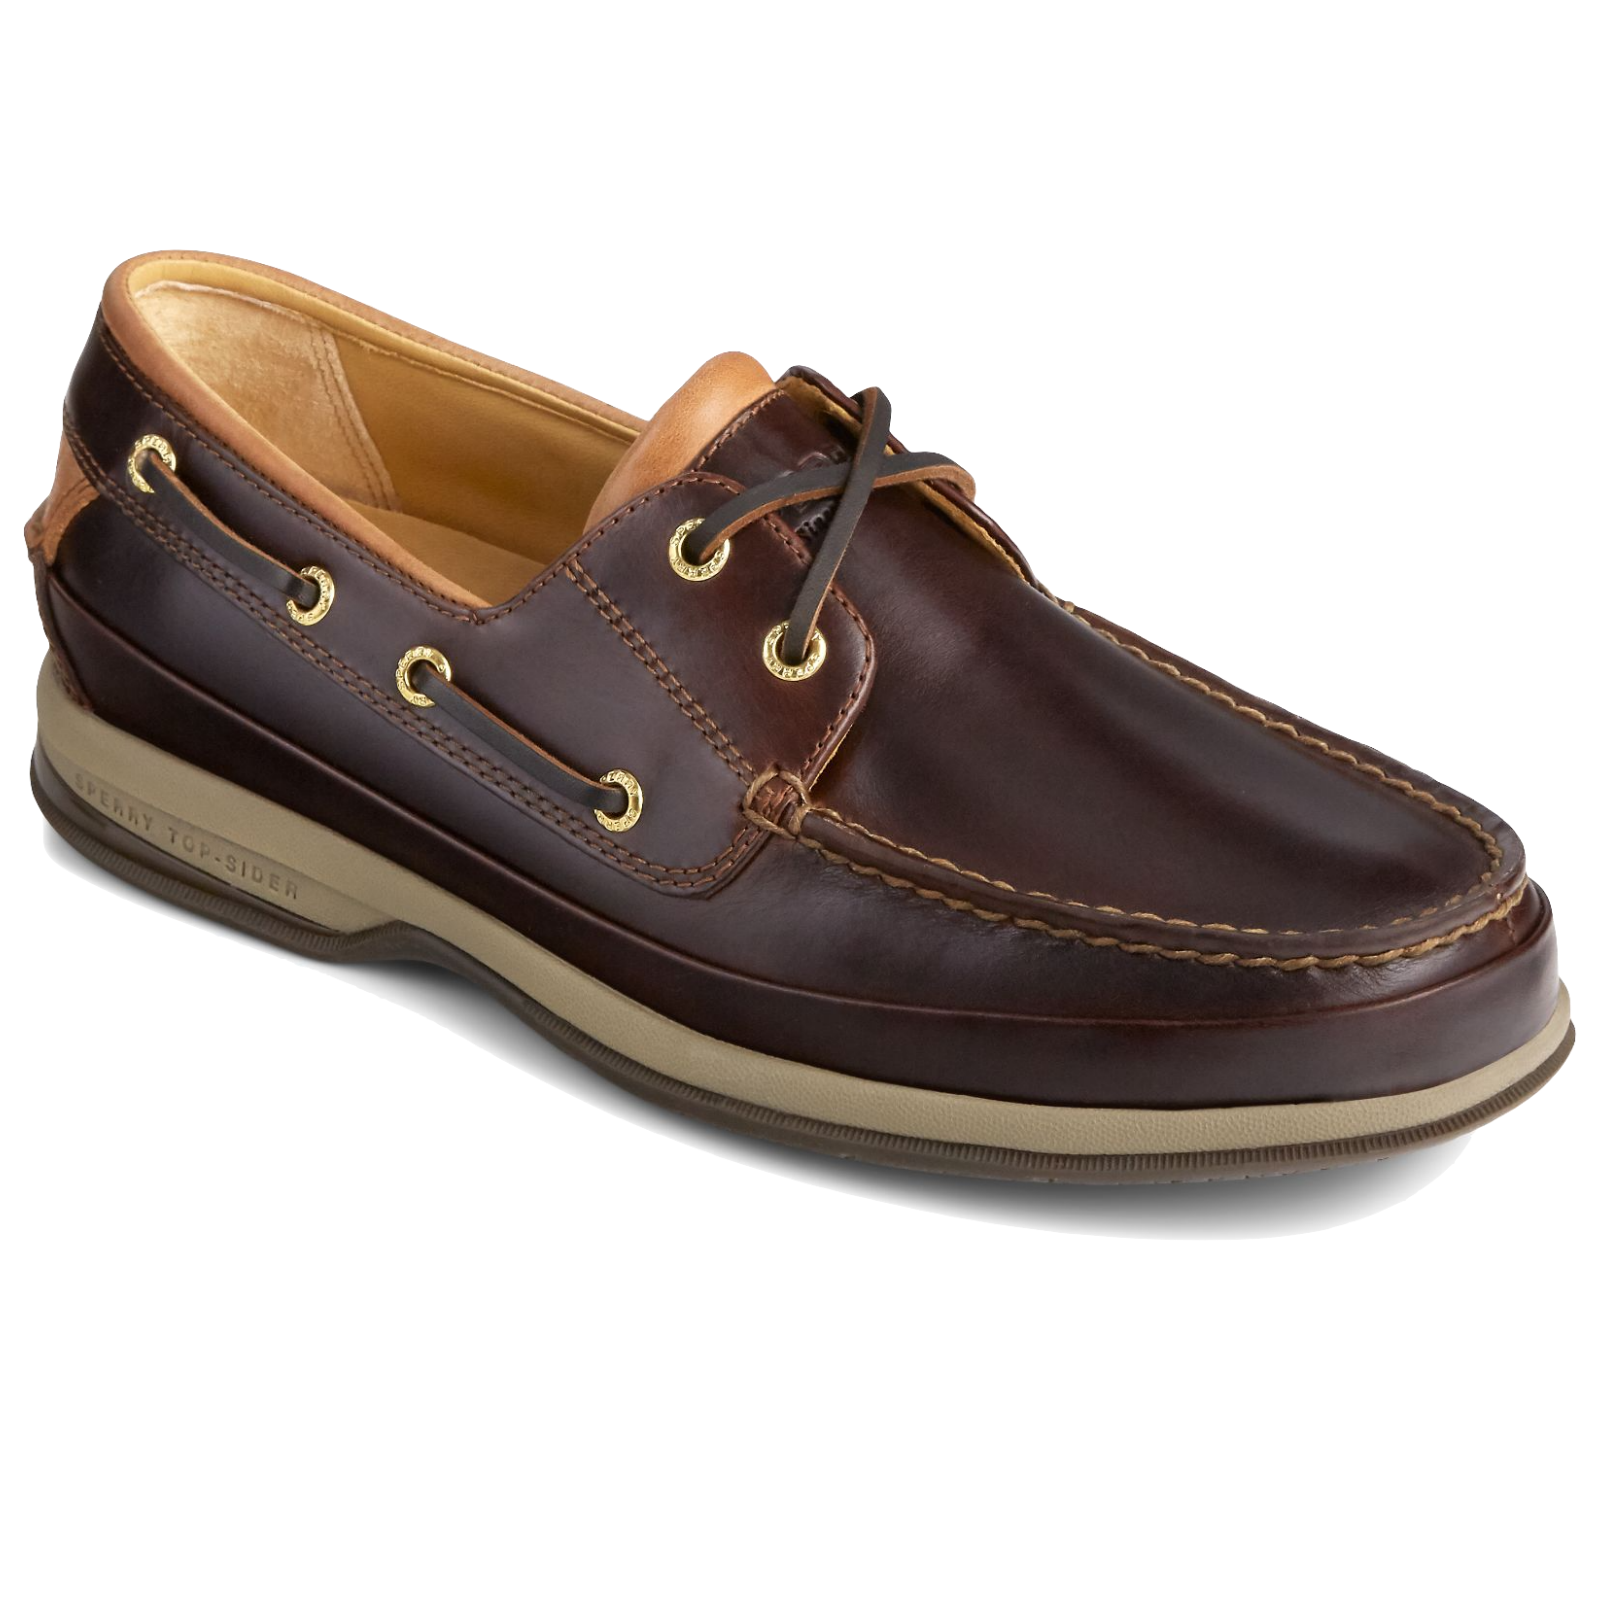 SPERRY GOLD CUP-Brown leather boat shoes with gold eyelets